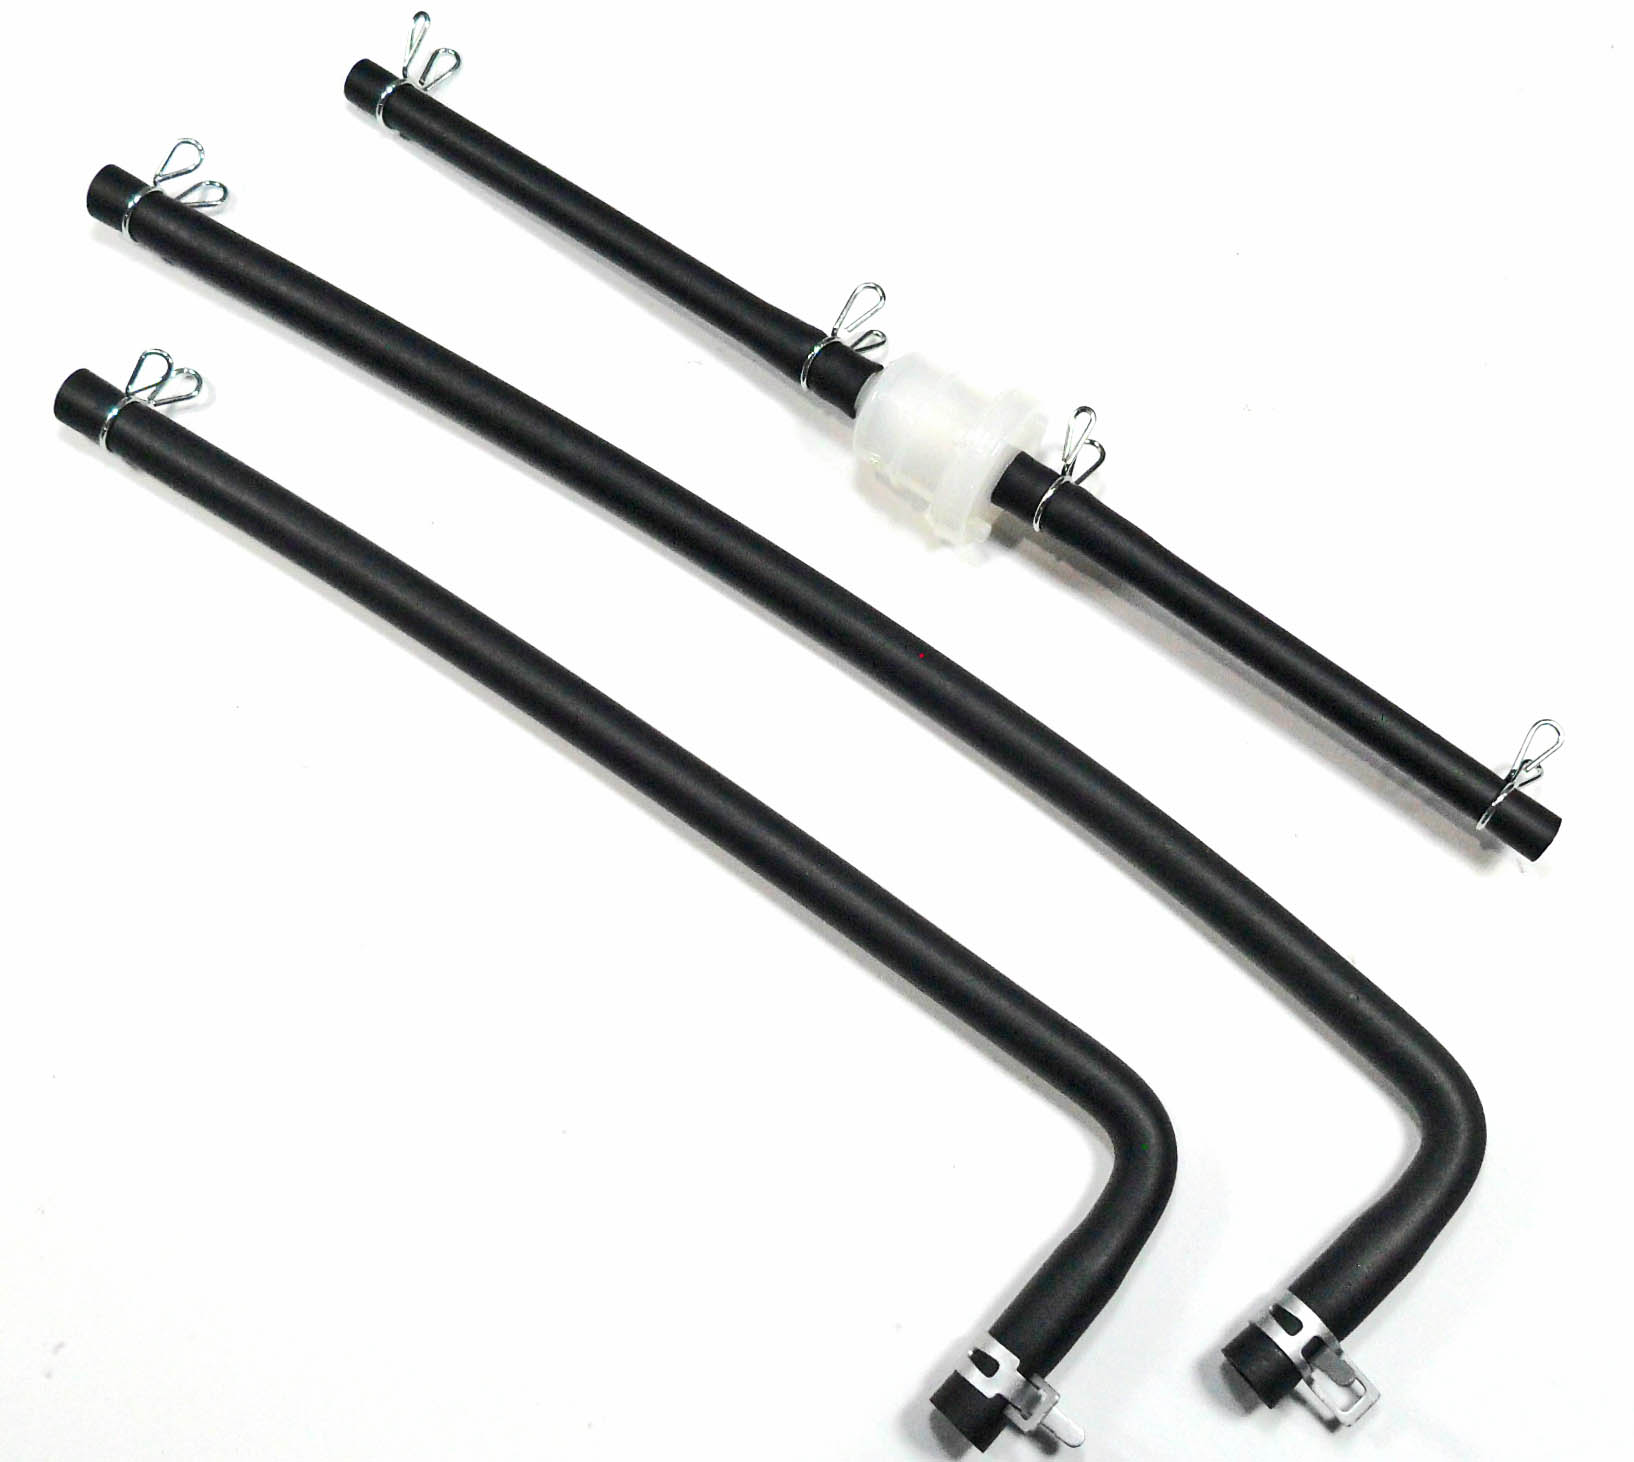 E-Ton 50cc 70cc 90cc ATV Fuel Line Kit Includes Primary Line, Reserve Line & Fuel Filer assembly The lines in this kit attach to the rear ports on the tank. Some older ETON's had open front ports. This kit will not work for those models. - Click Image to Close